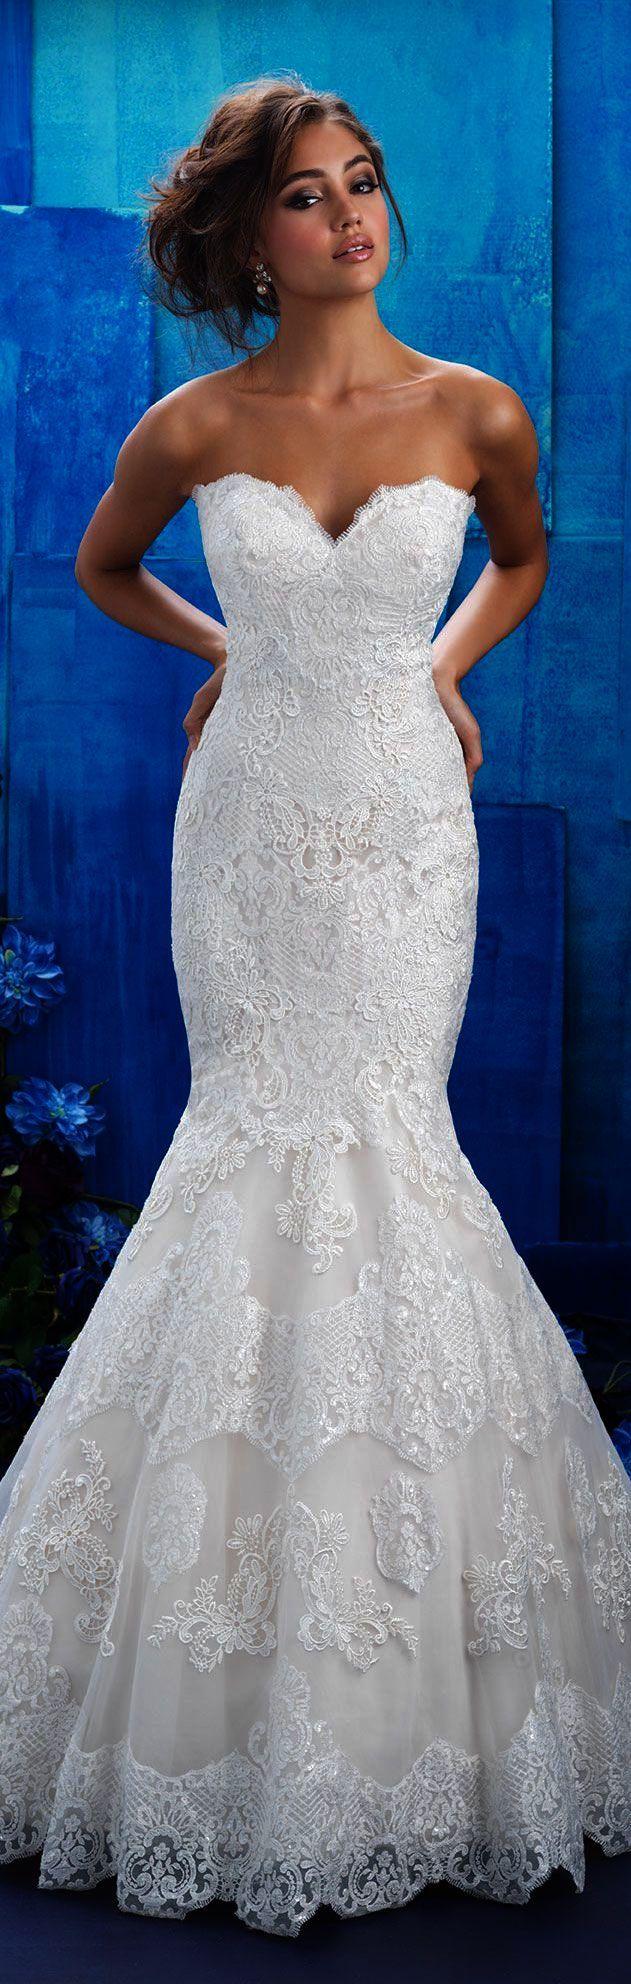 Wedding - Terrific... Lace Wedding Dress With Open Back And Cap Sleeves #get 